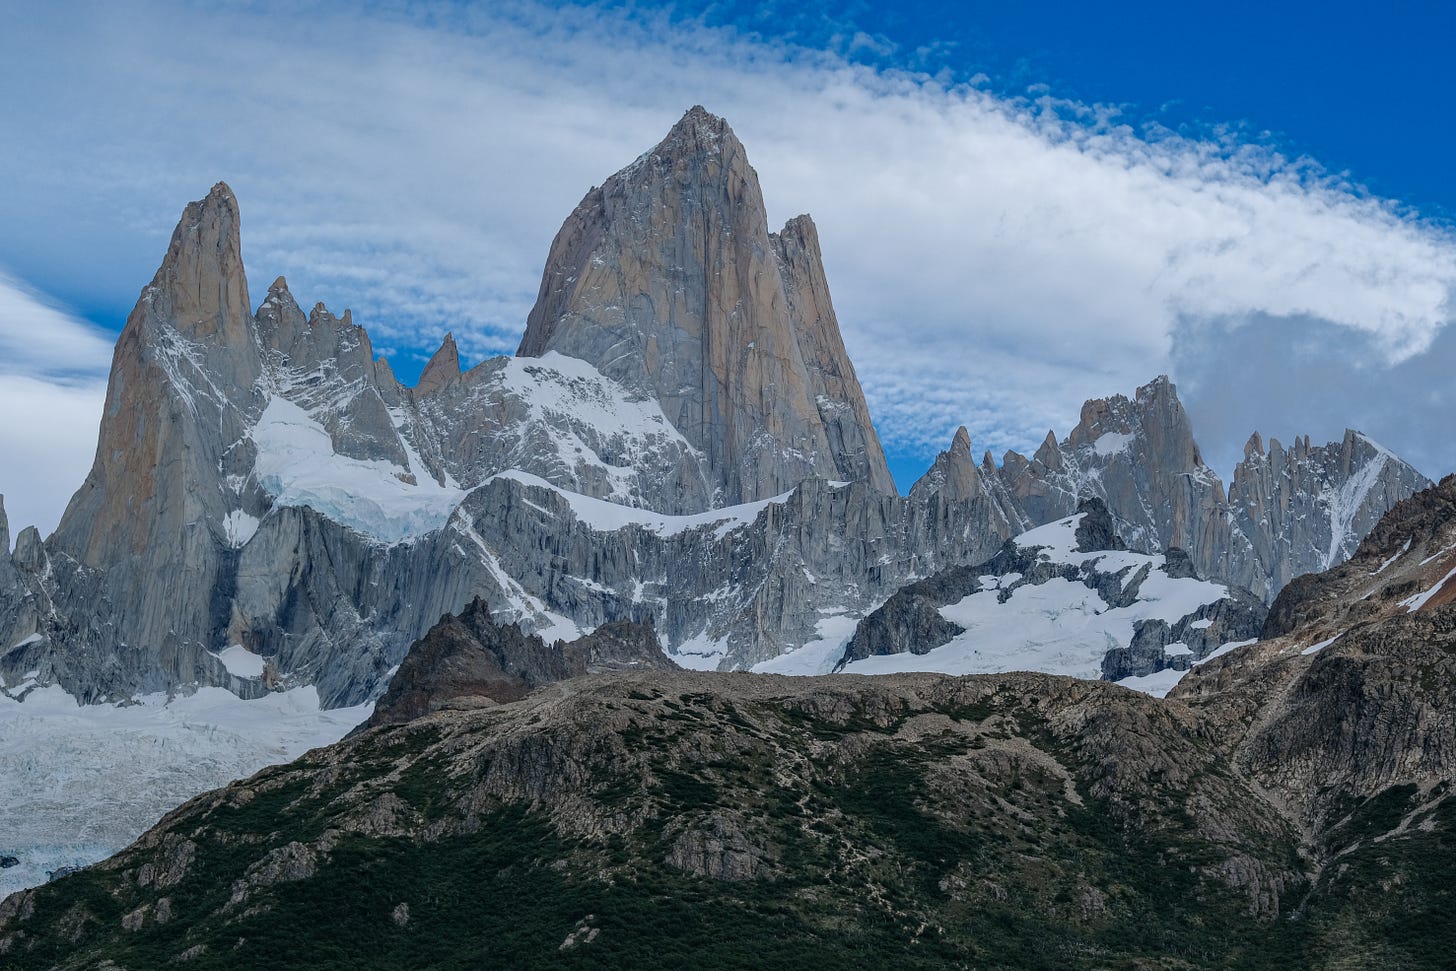 The Fitz massif, comprised of several granite spires and peaks, rise from the Patagonian forest floor, still covered in snow. Fitz Roy is the most prominent in the center, rising against a cloud-filled sky.